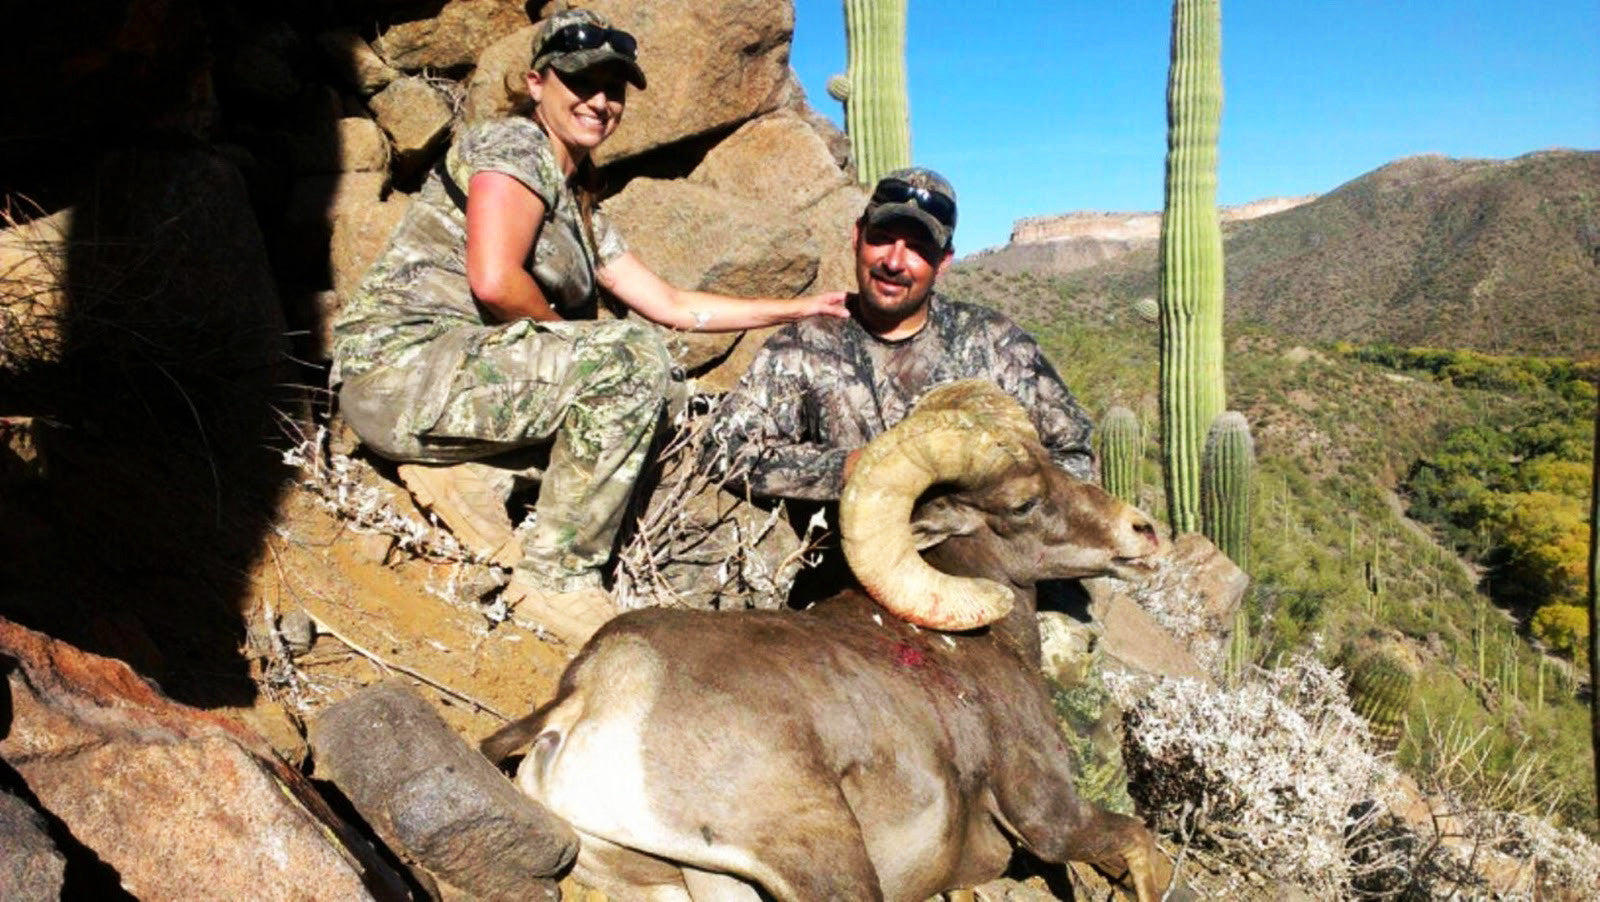 two people in camo crouch over a large horned animal in the desert